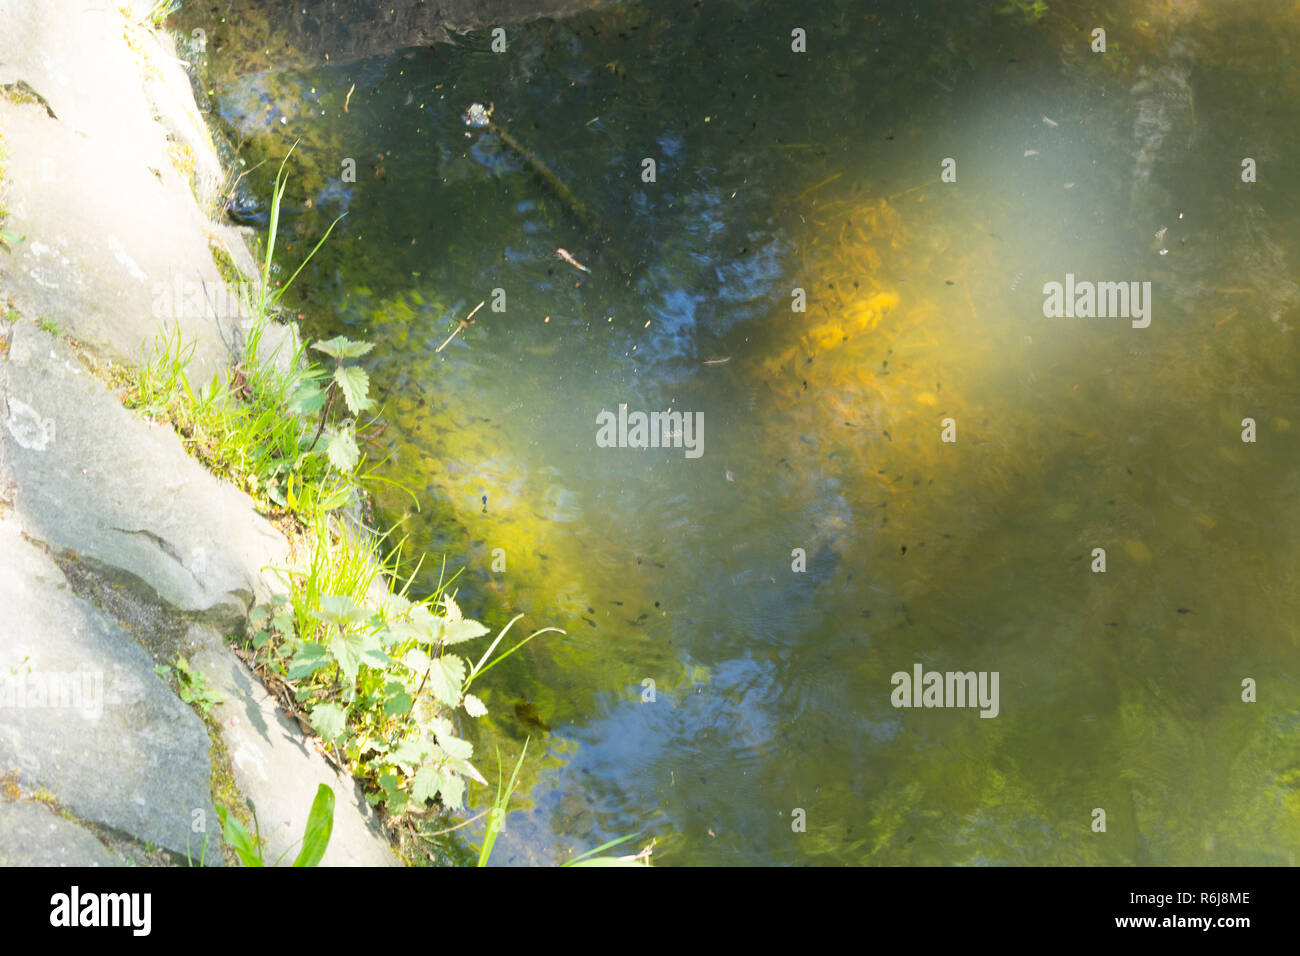 Tadpoles family and green nature background in the water Stock Photo